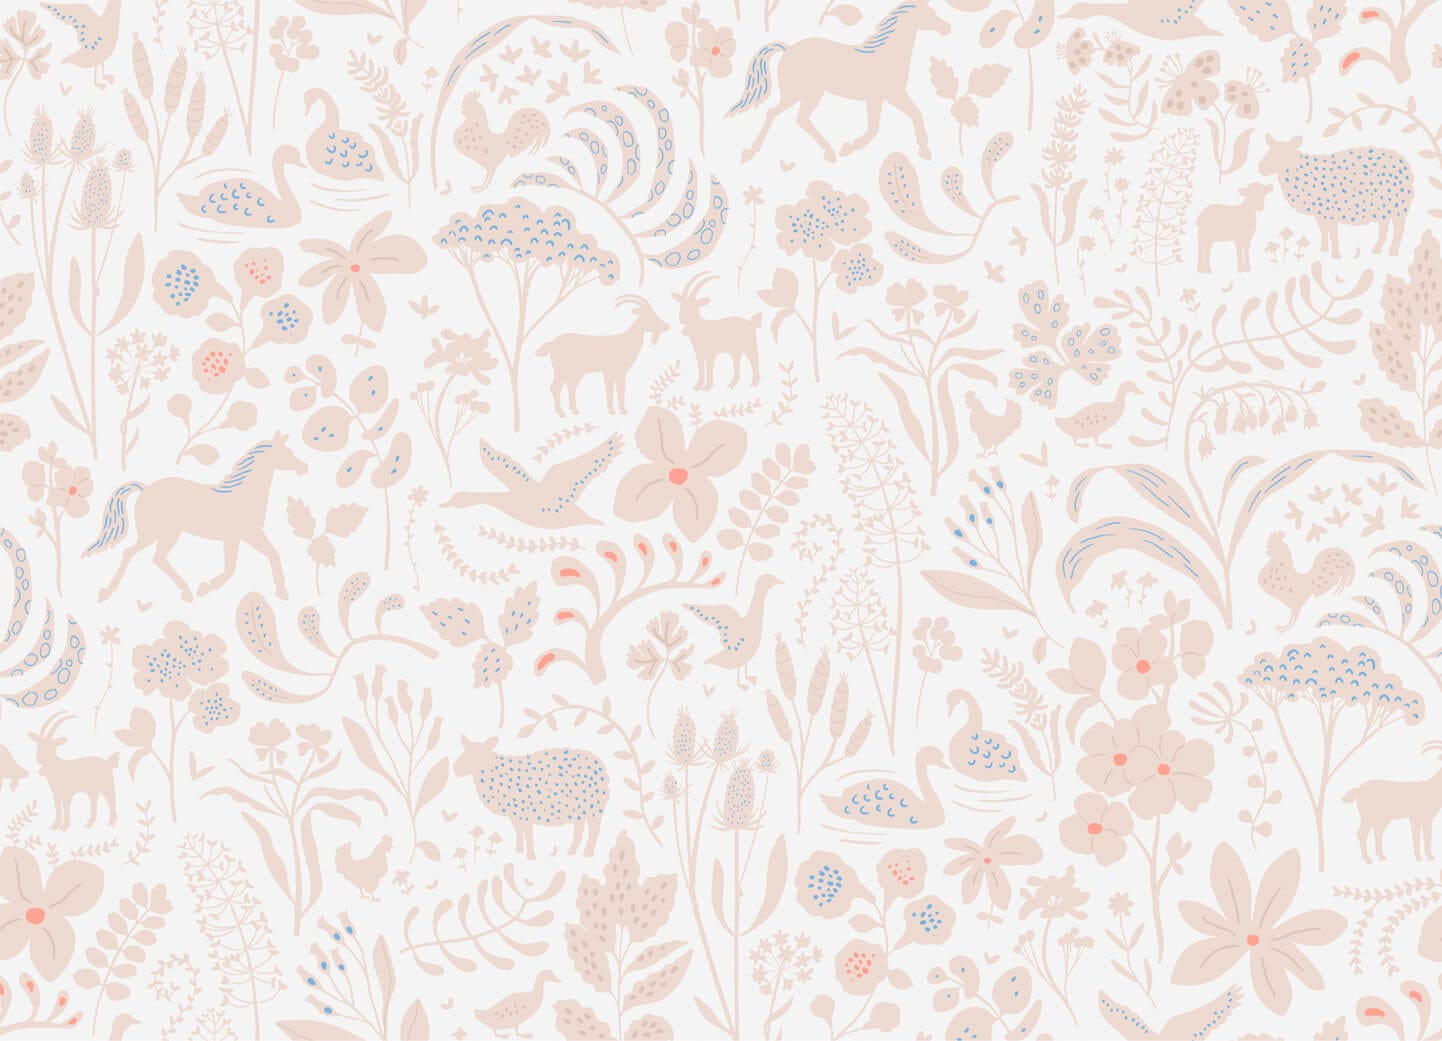 Wallpaper of ecru coloured flowers, leaves, swans, chickens, deers, ducks with a white background.